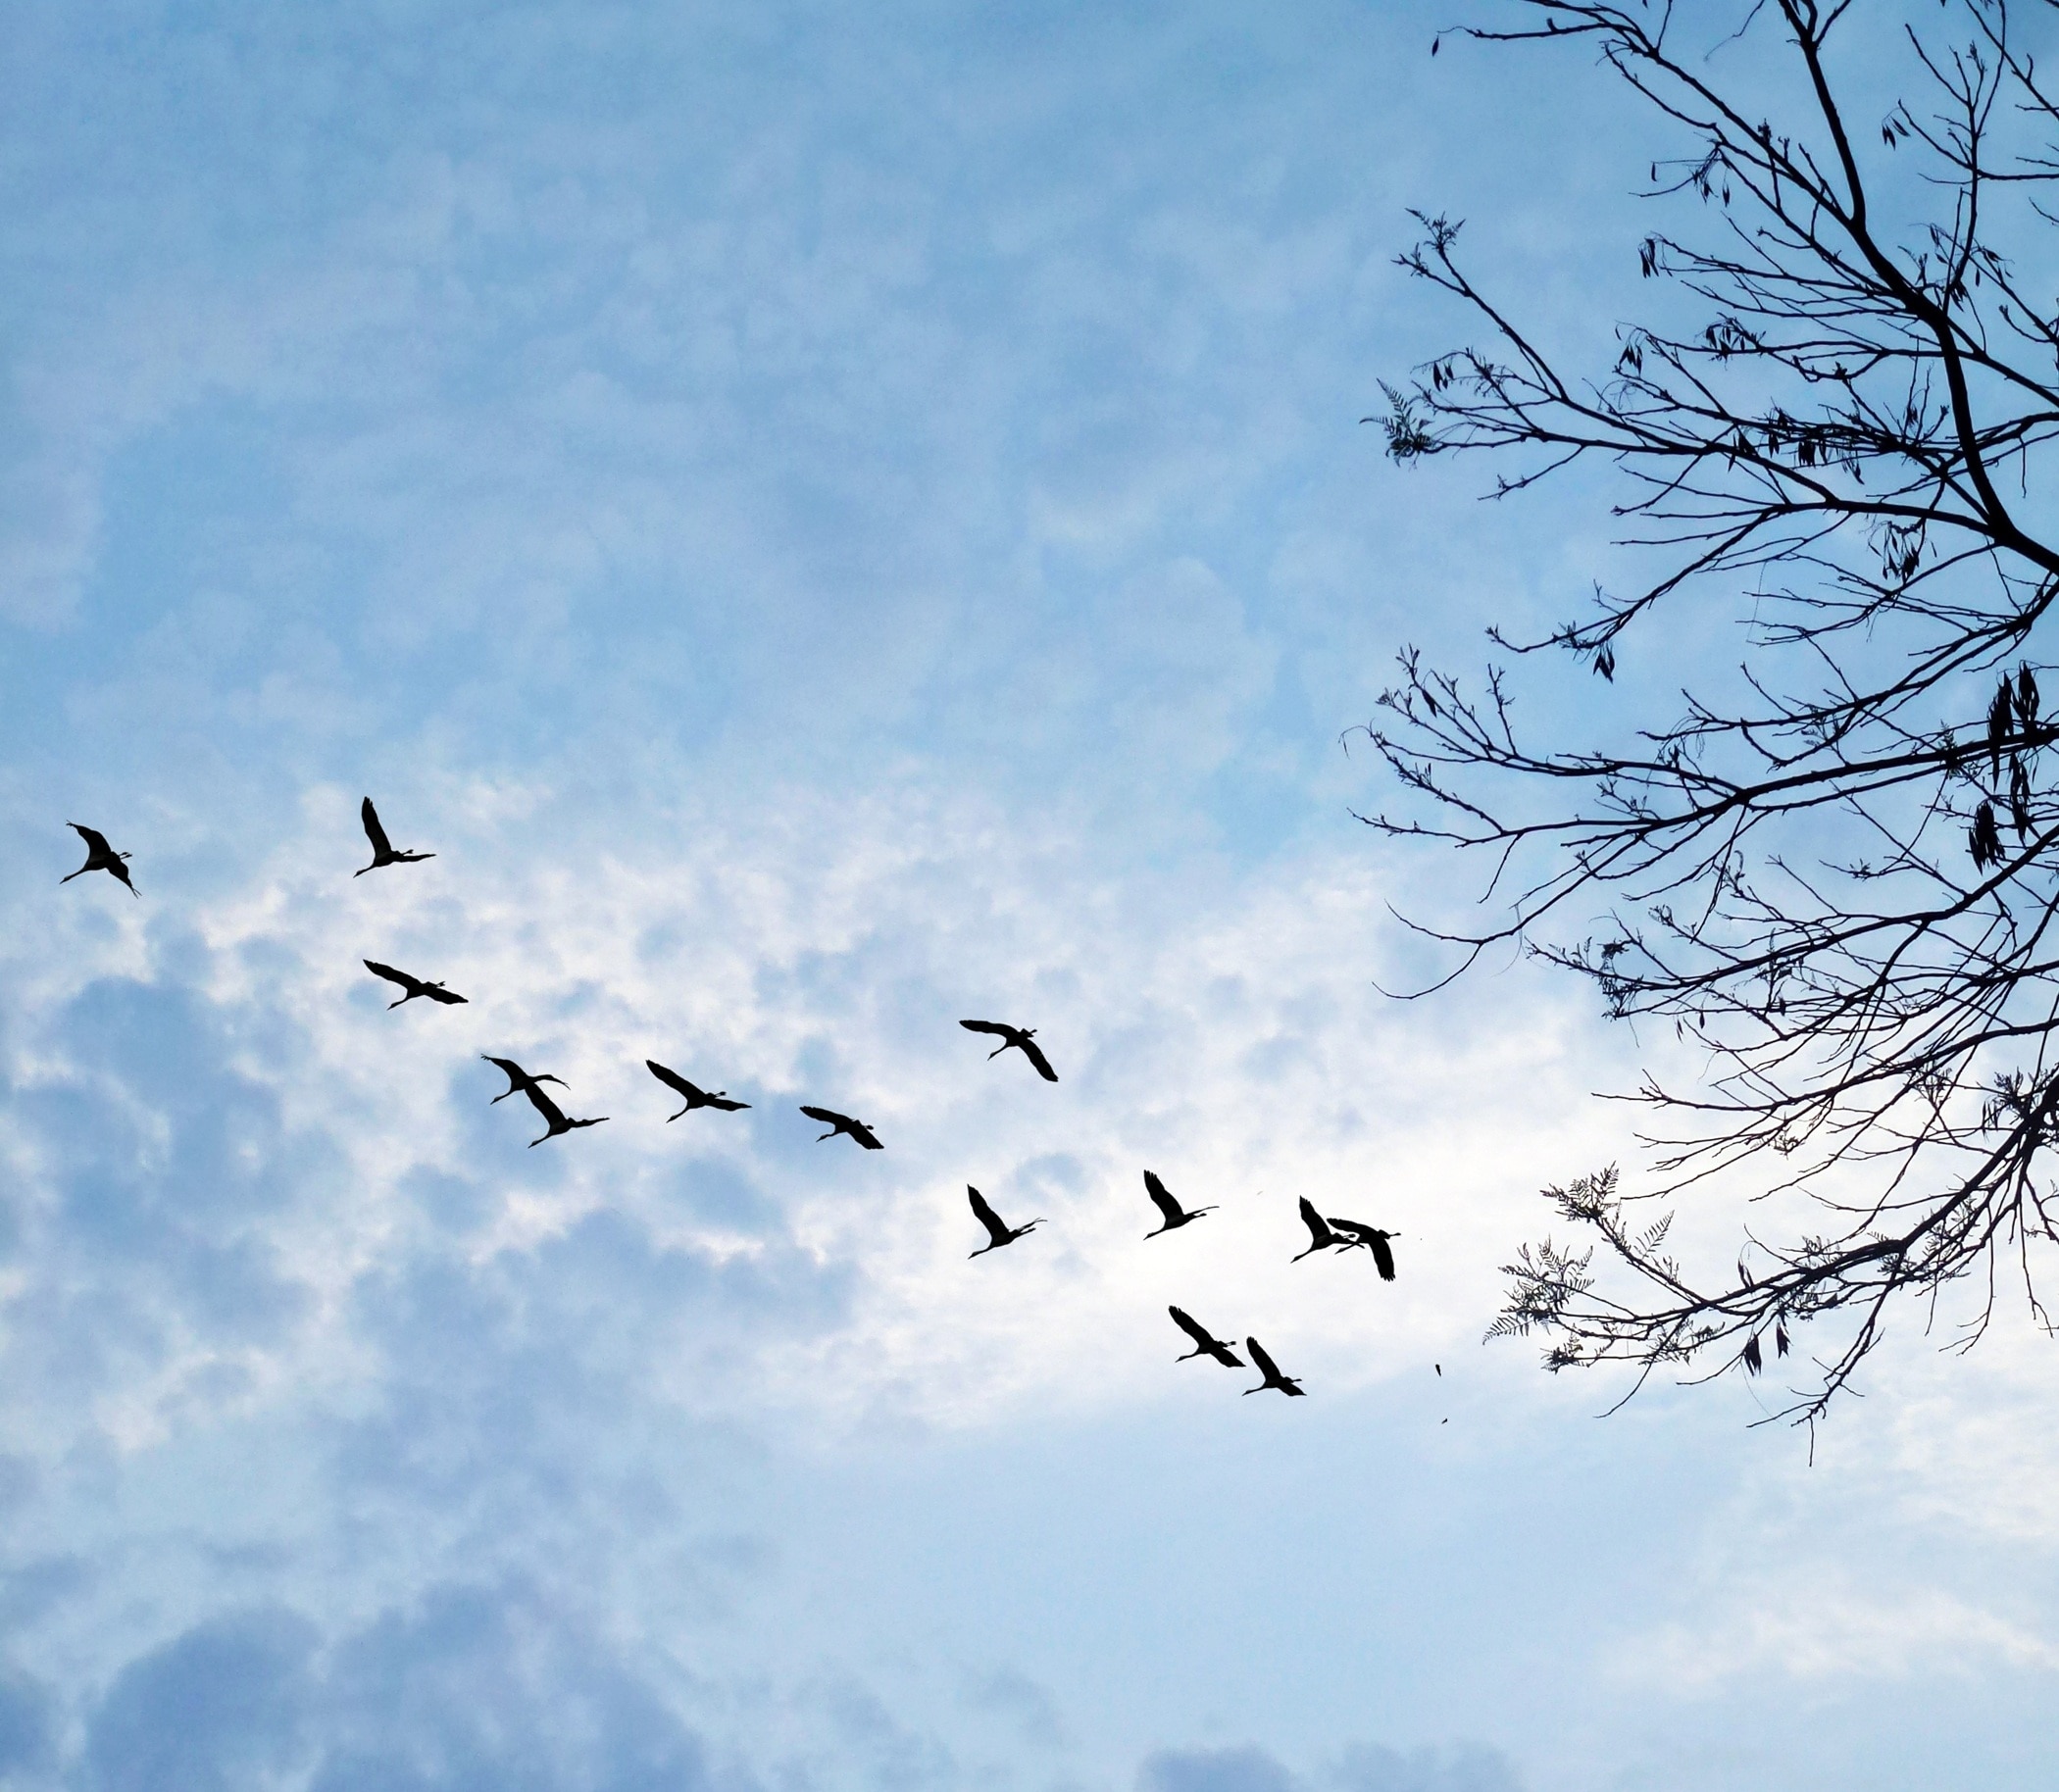 wildlife photography of a flock of birds flying over blue sky